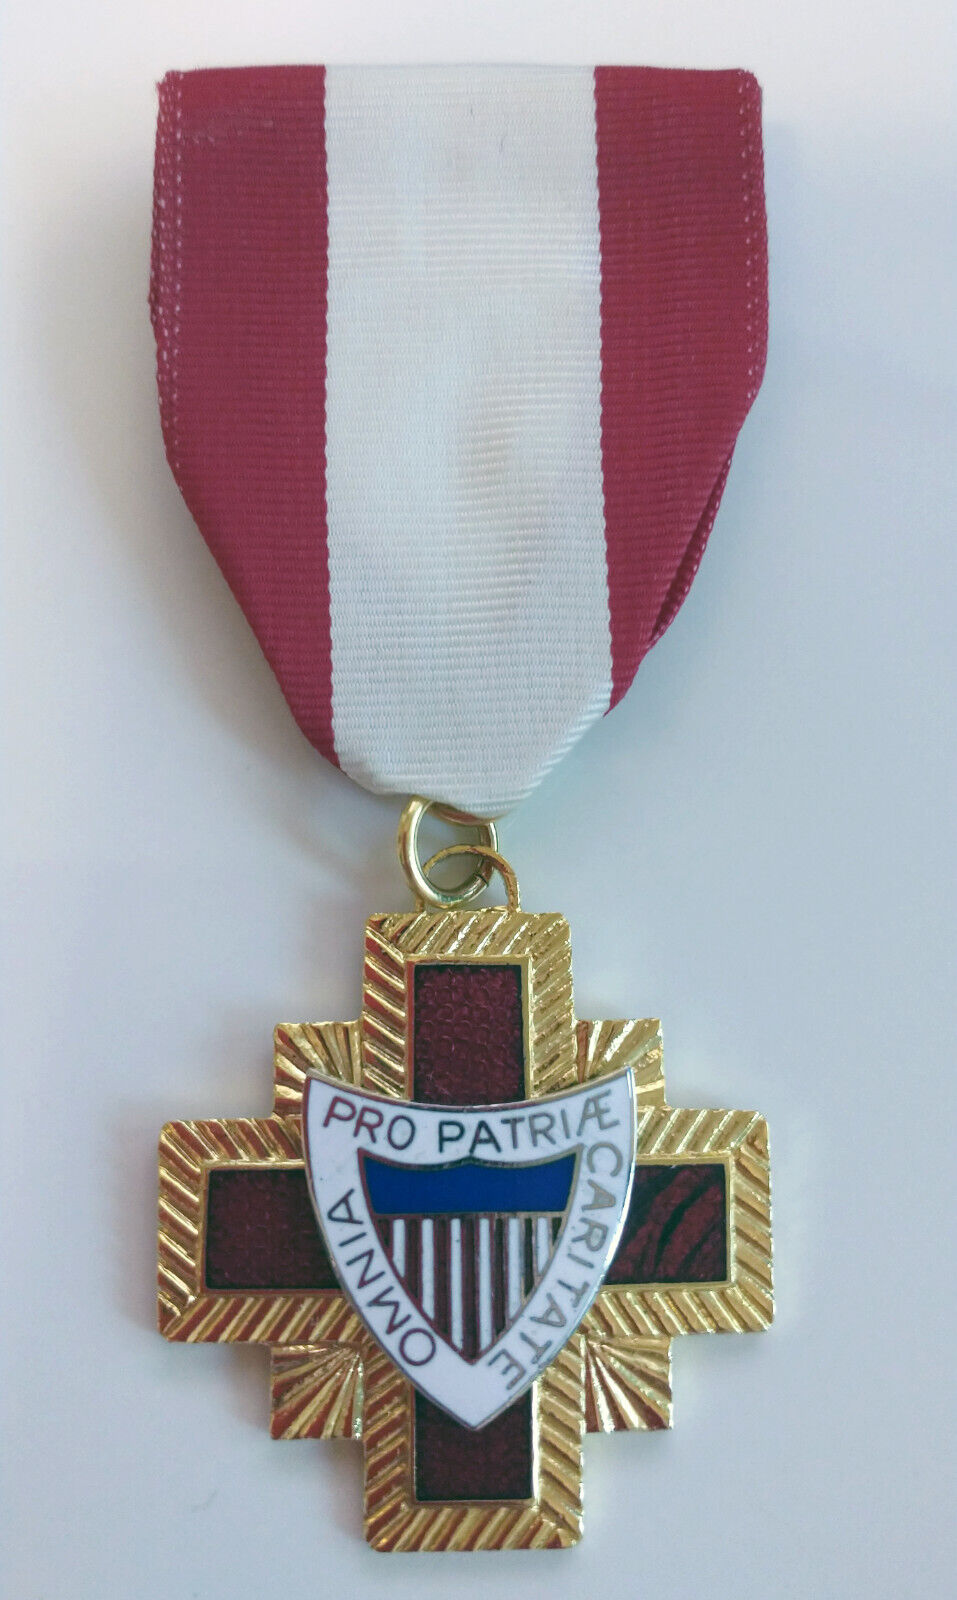 U.S. AMERICAN SOCIETY OF MILITARY SURGEONS RARE MEDAL FULL SIZE WHITE RED RIBBON